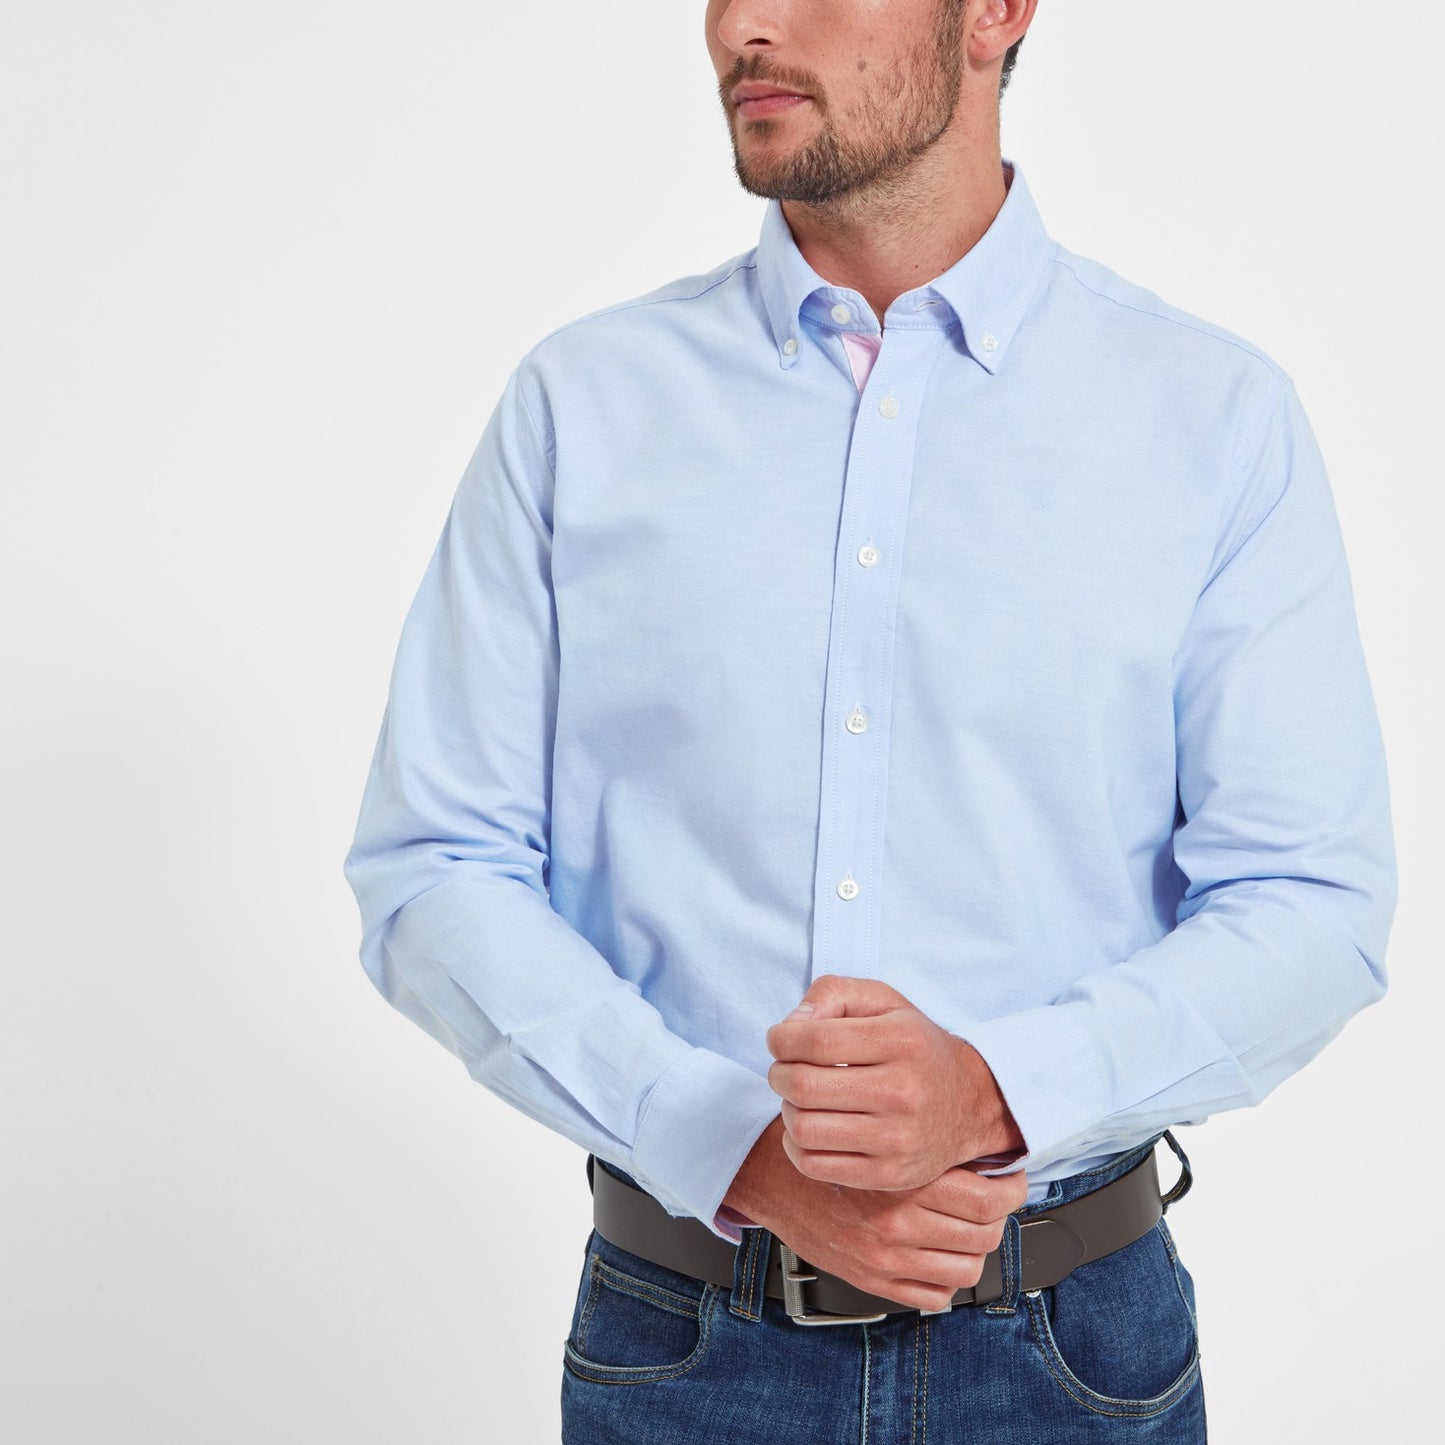 Schoffel Shirts, the Holt Soft Oxford Tailored Shirt